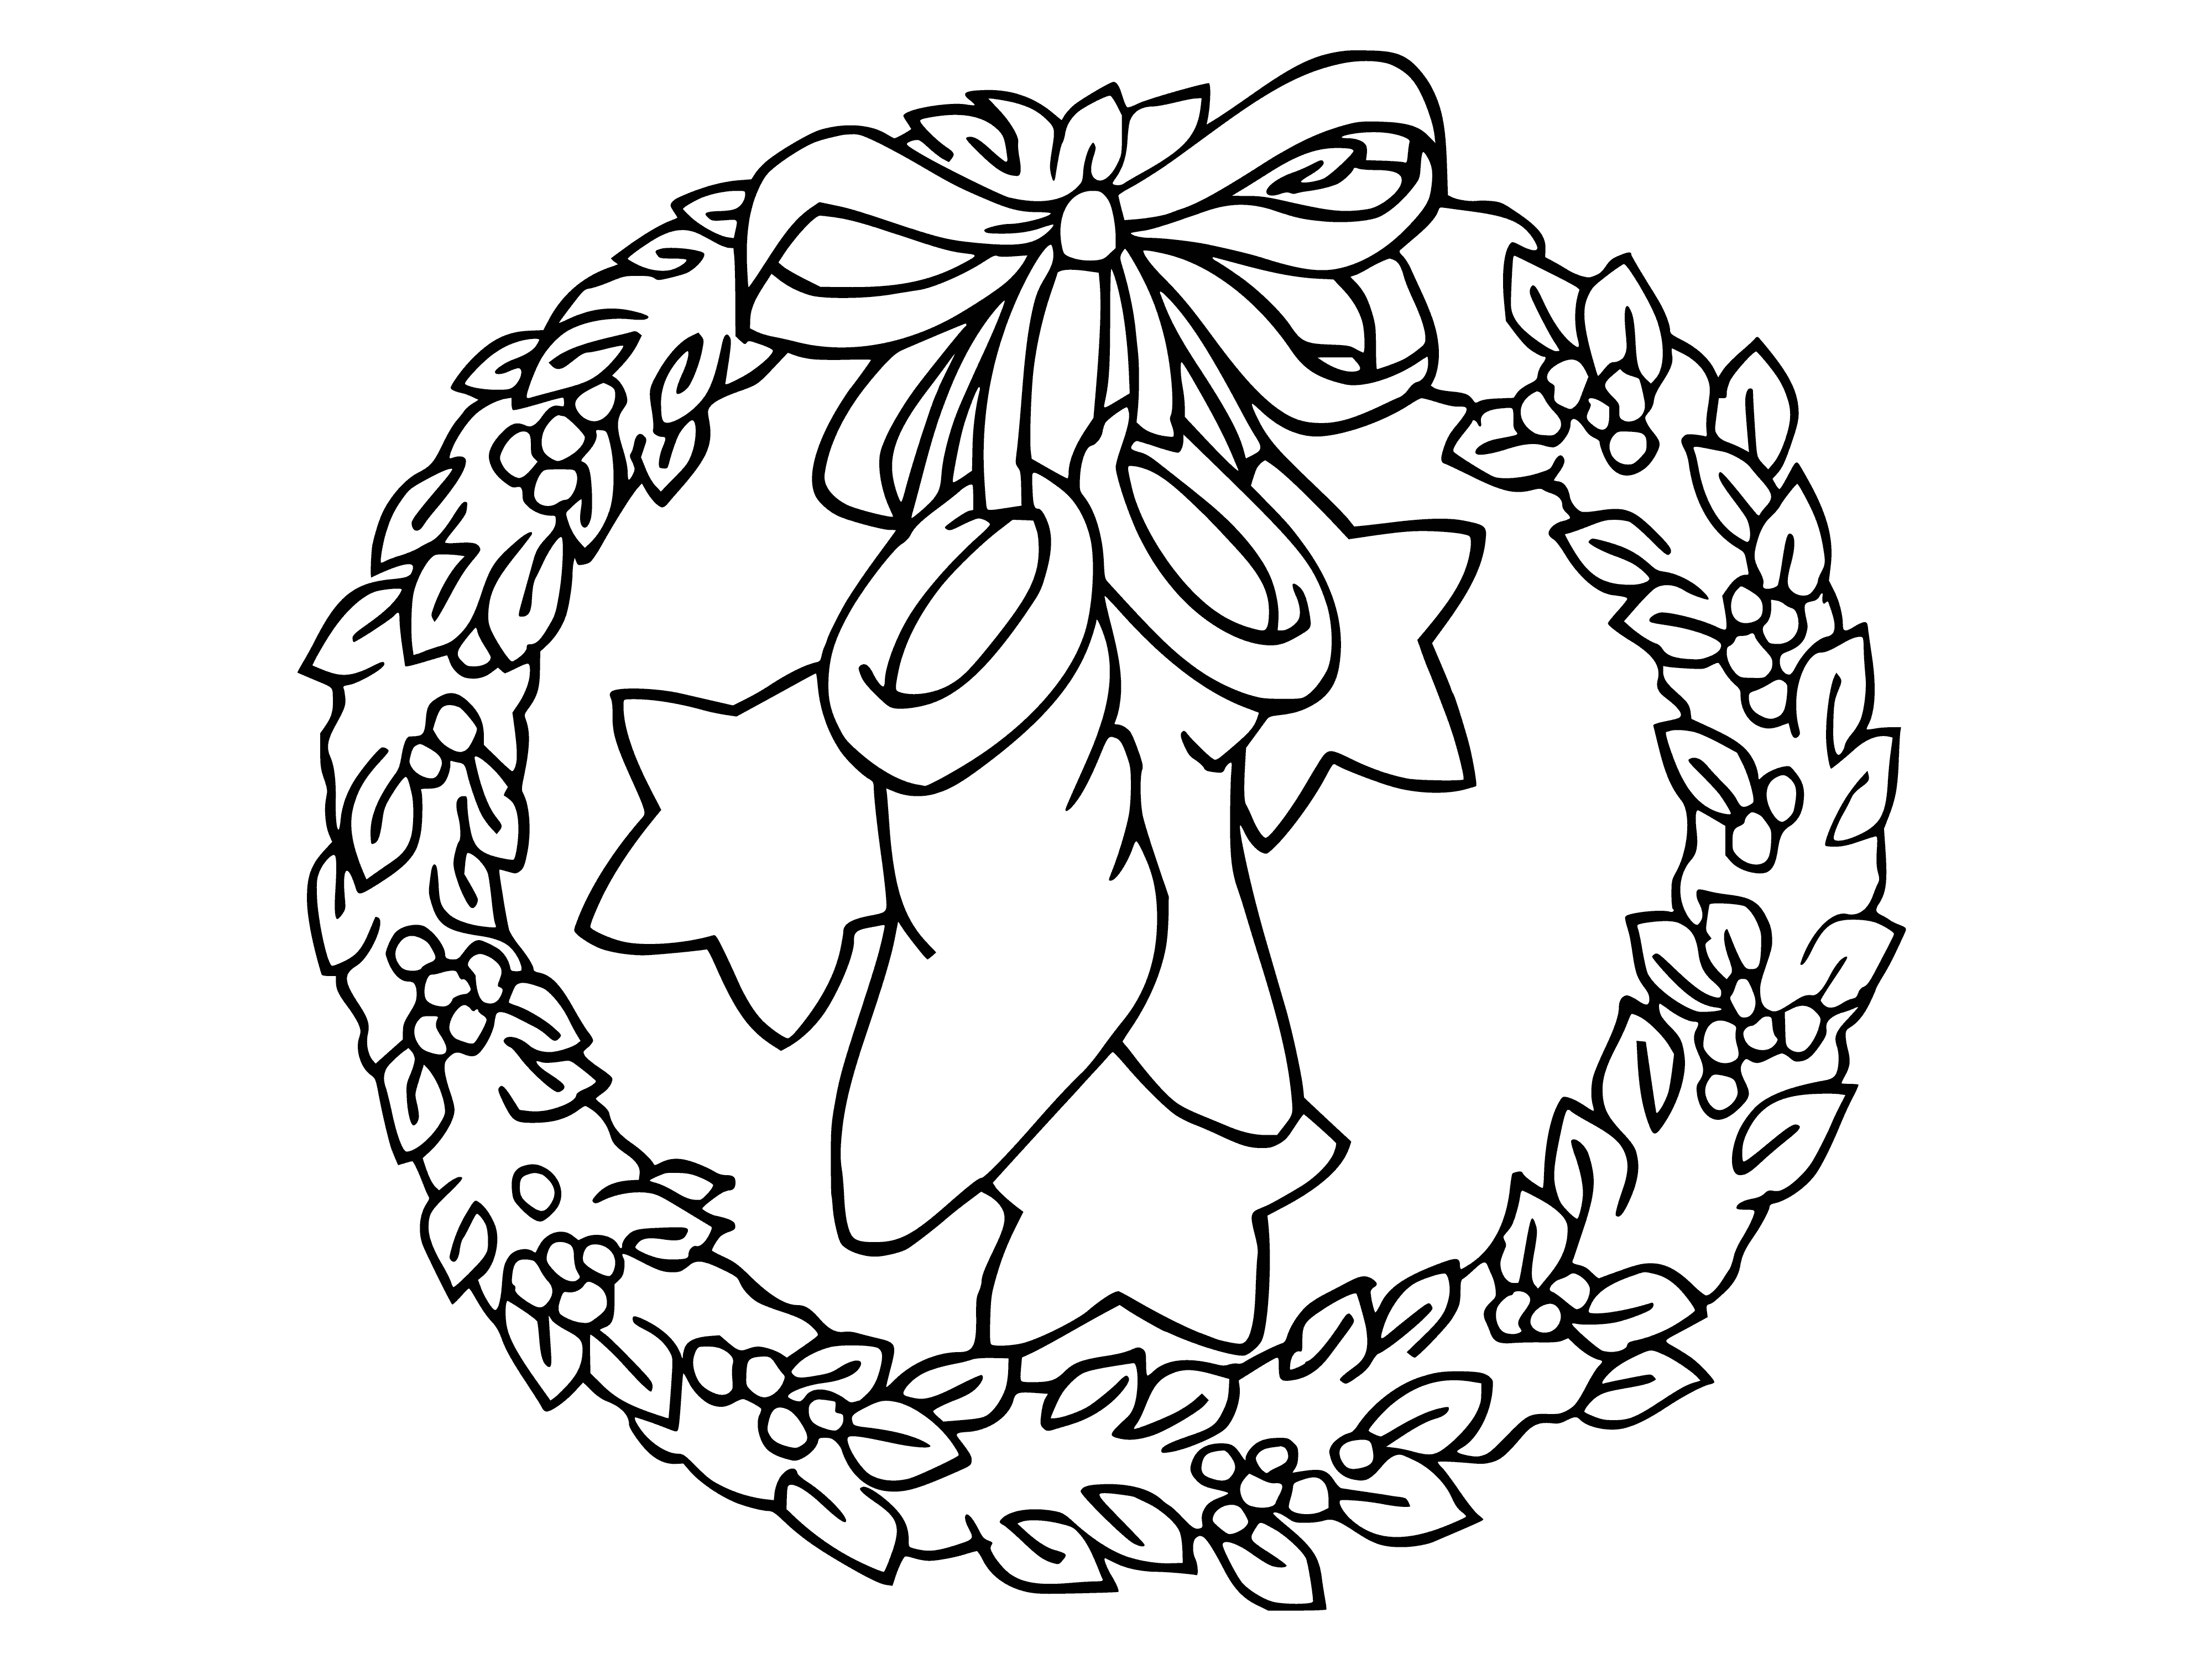 coloring page: it's a fun holiday craft to enjoy with the whole family.

Color a festive Christmas wreath - fun holiday craft for the whole family! #xmascraft #funwithfamily